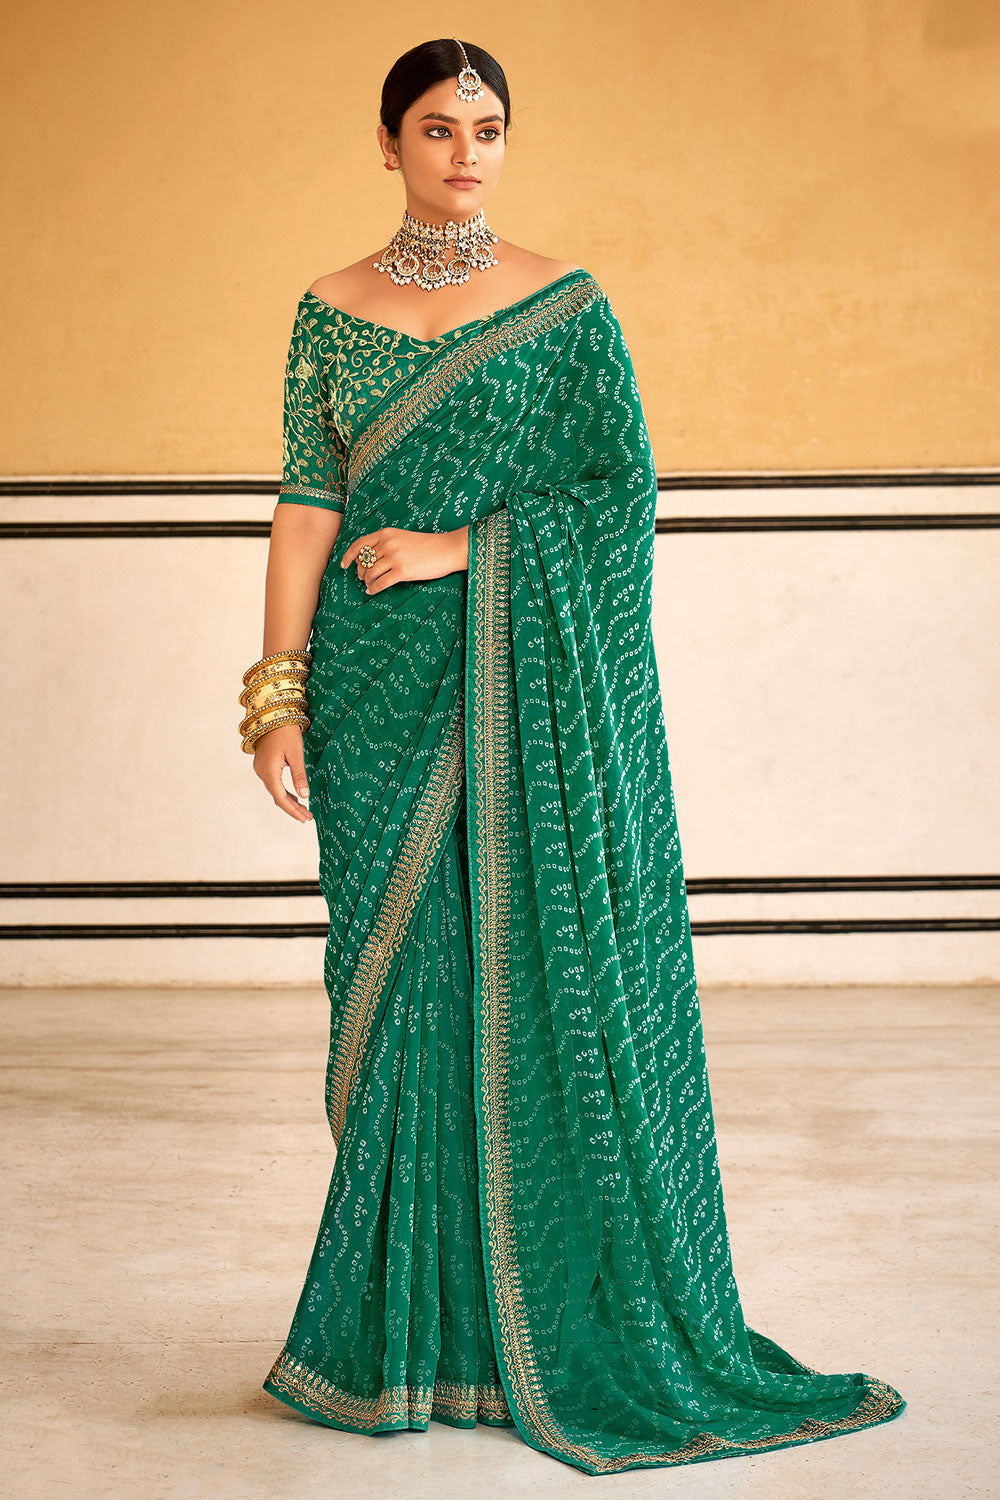 Green Bandhani Design Saree With Embroidery Work Blouse